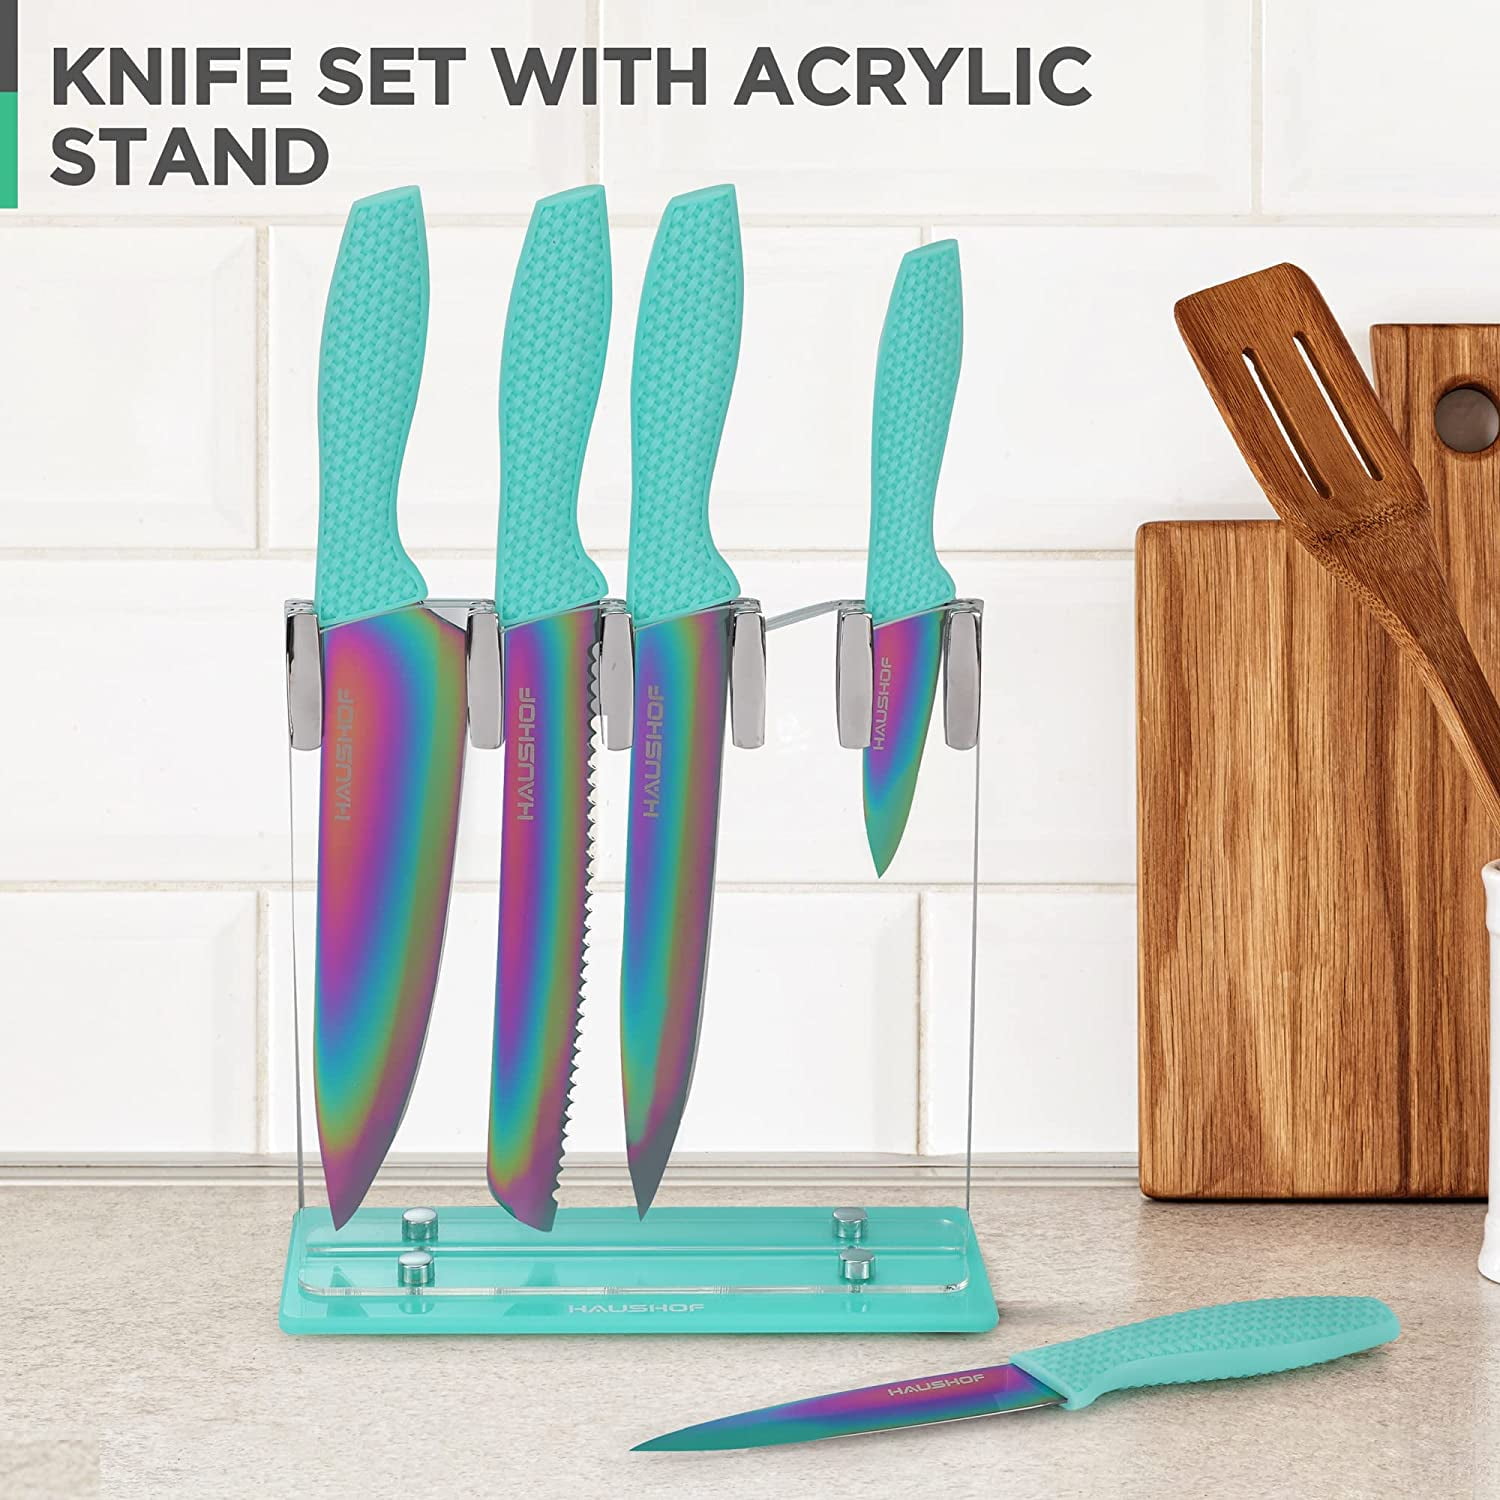 Inside Deals: Save Up to 64% — 5-Piece Knife Sets, HEPA Air